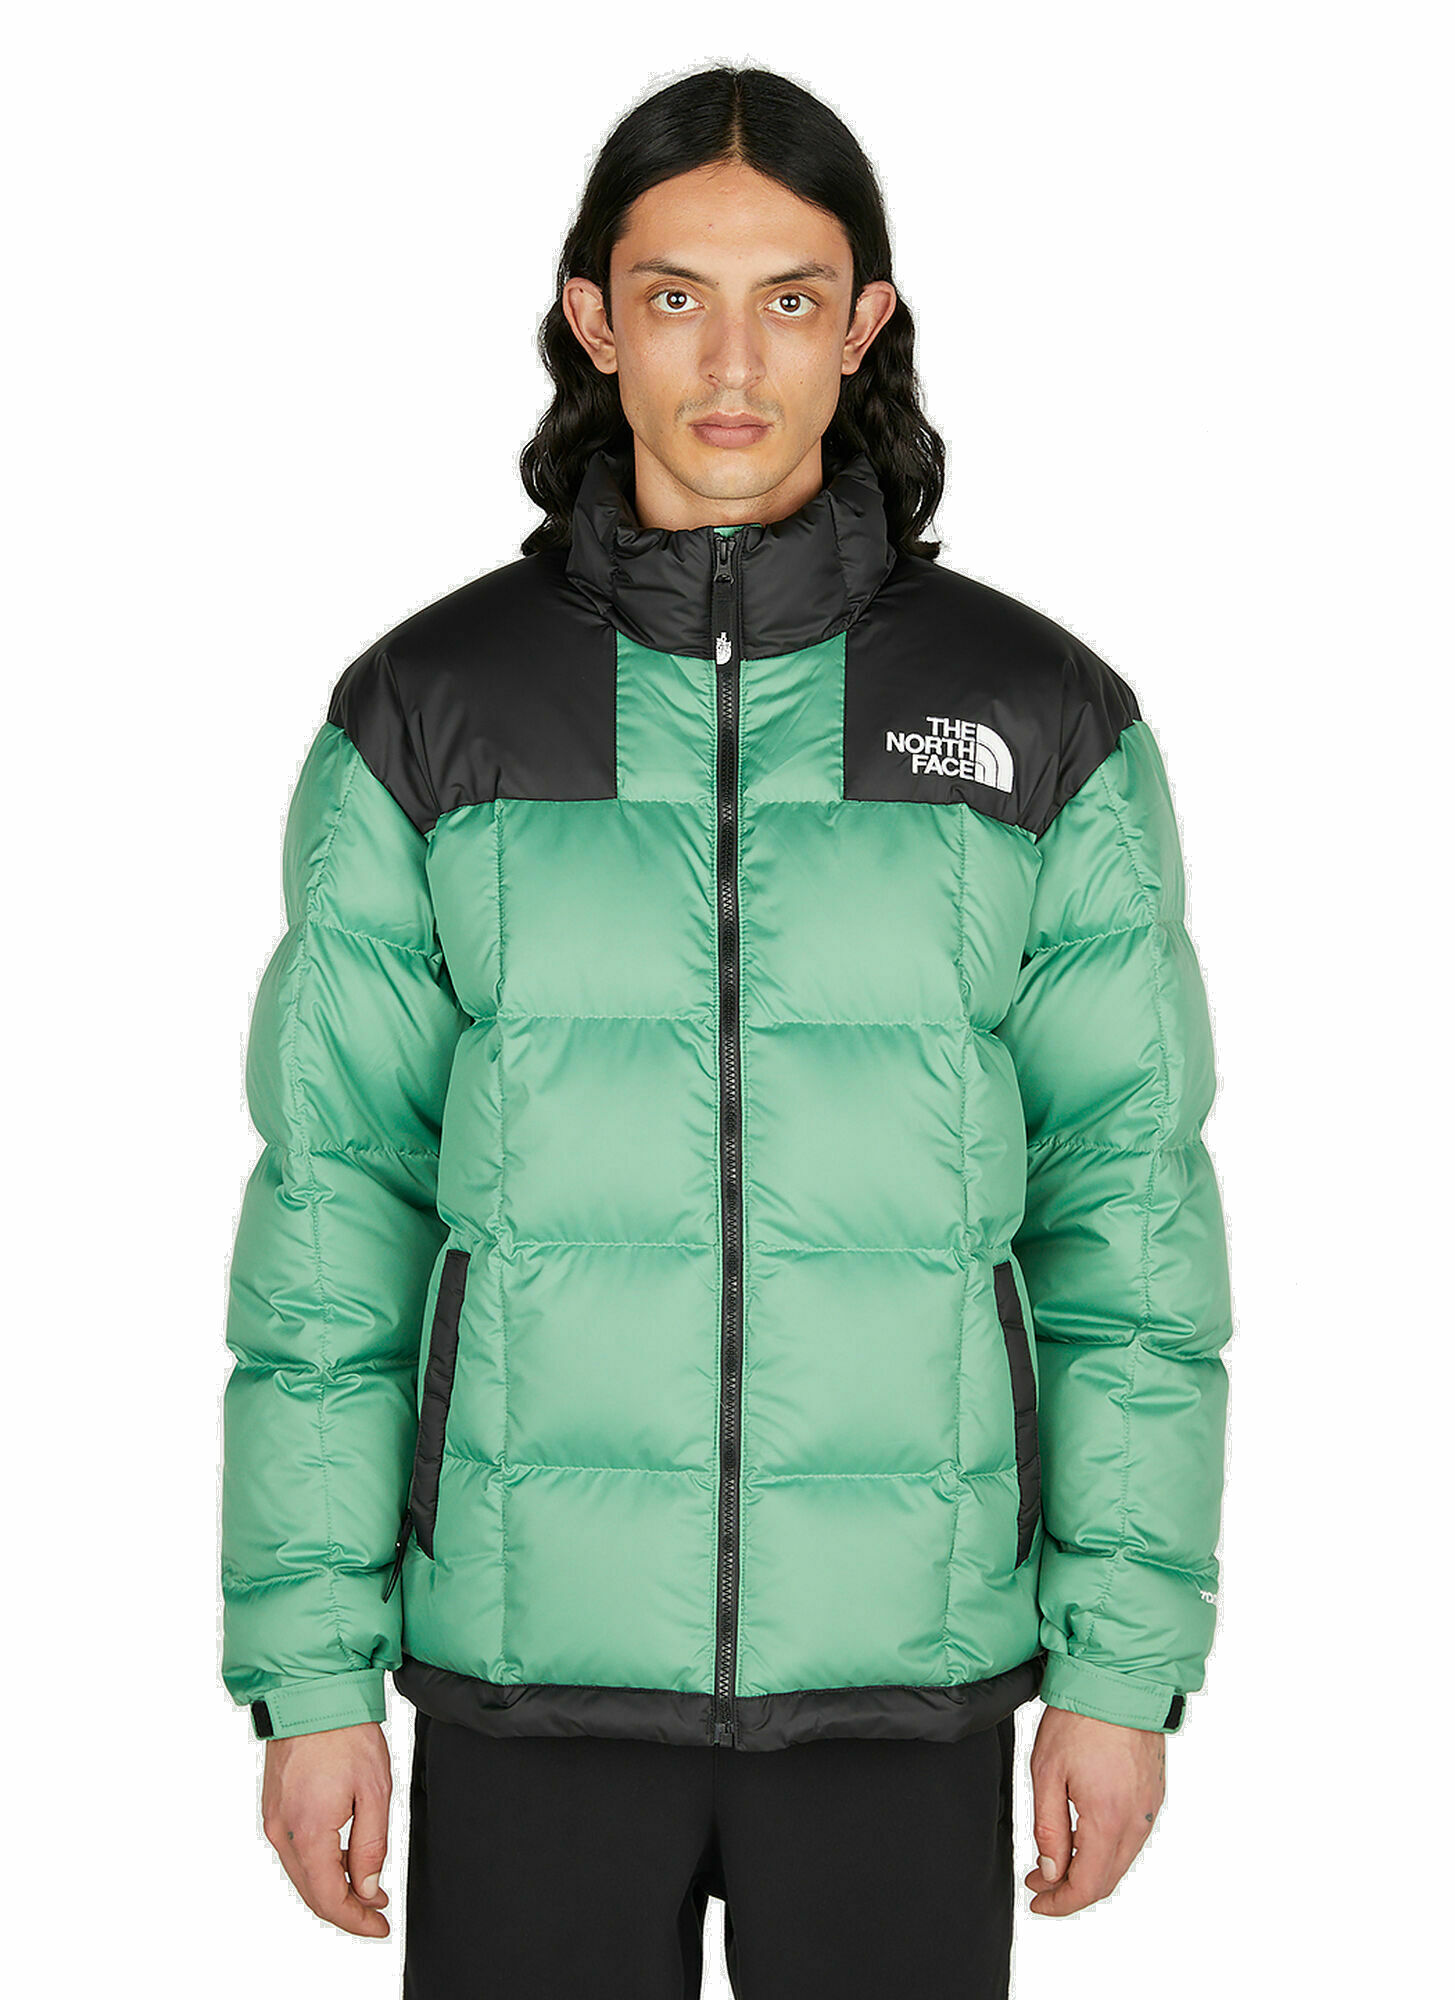 The North Face - Lhotse Jacket in Green The North Face